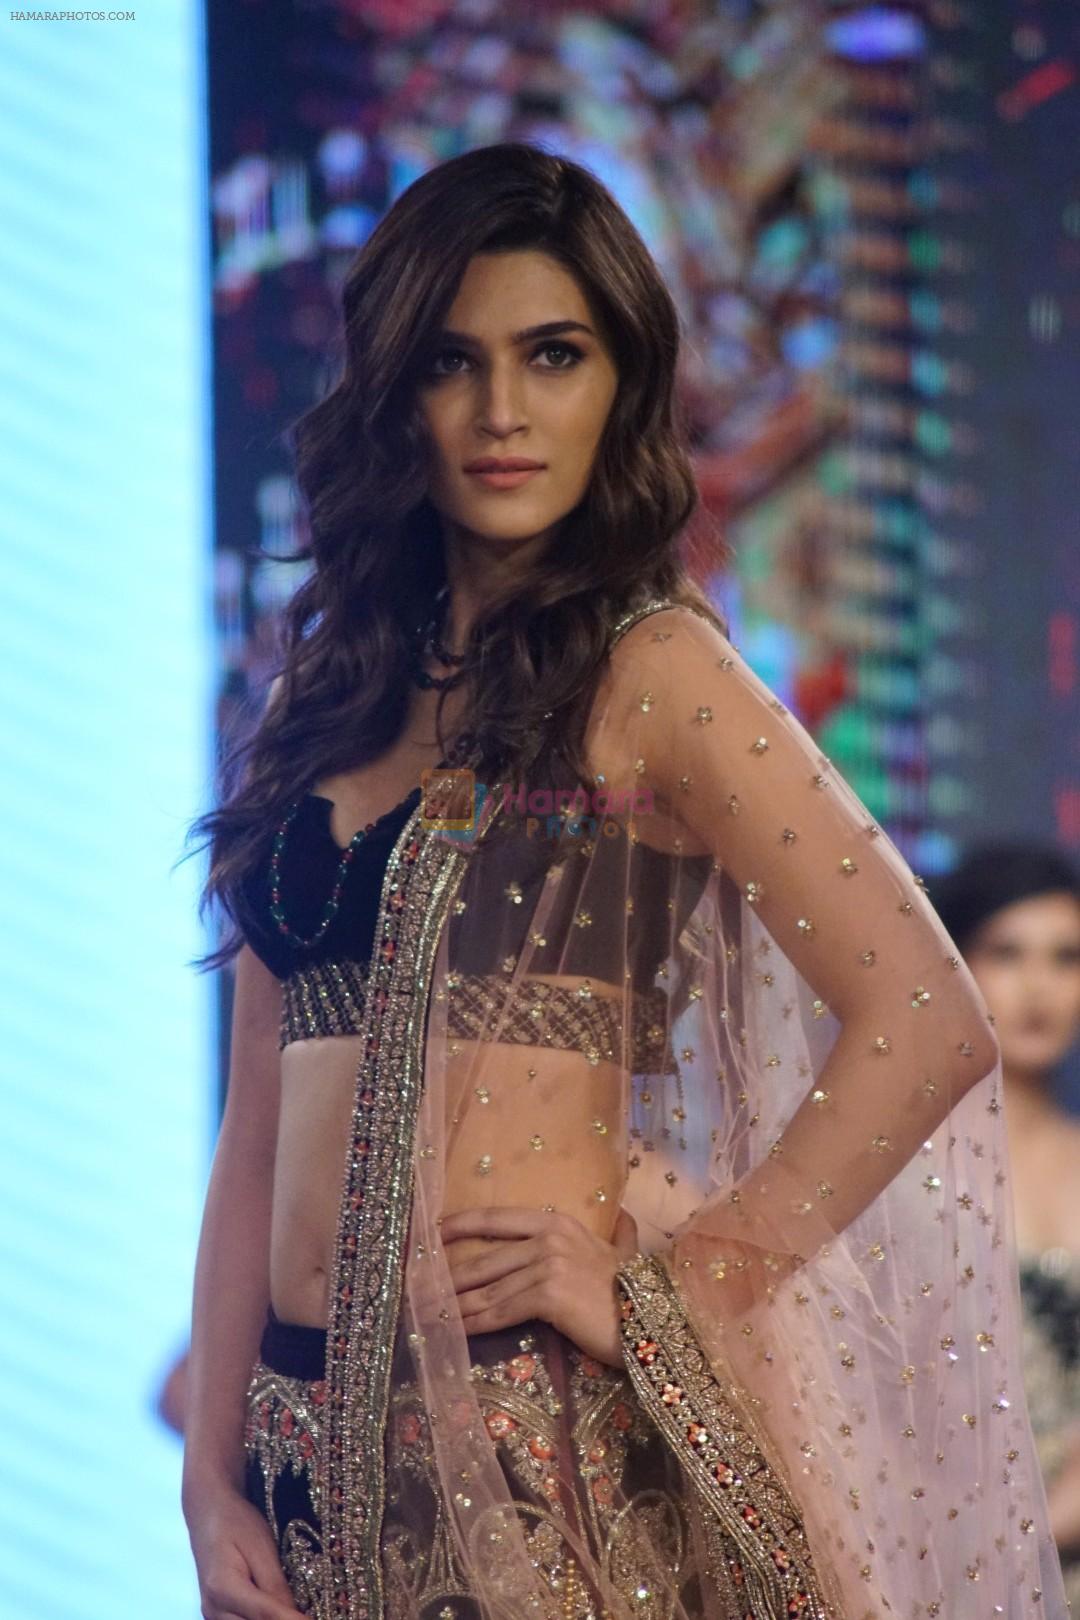 Kriti Sanon Walks The Ramp For Rocky S At Bombay Times Fashion Week 2017 on 10th Sept 2017